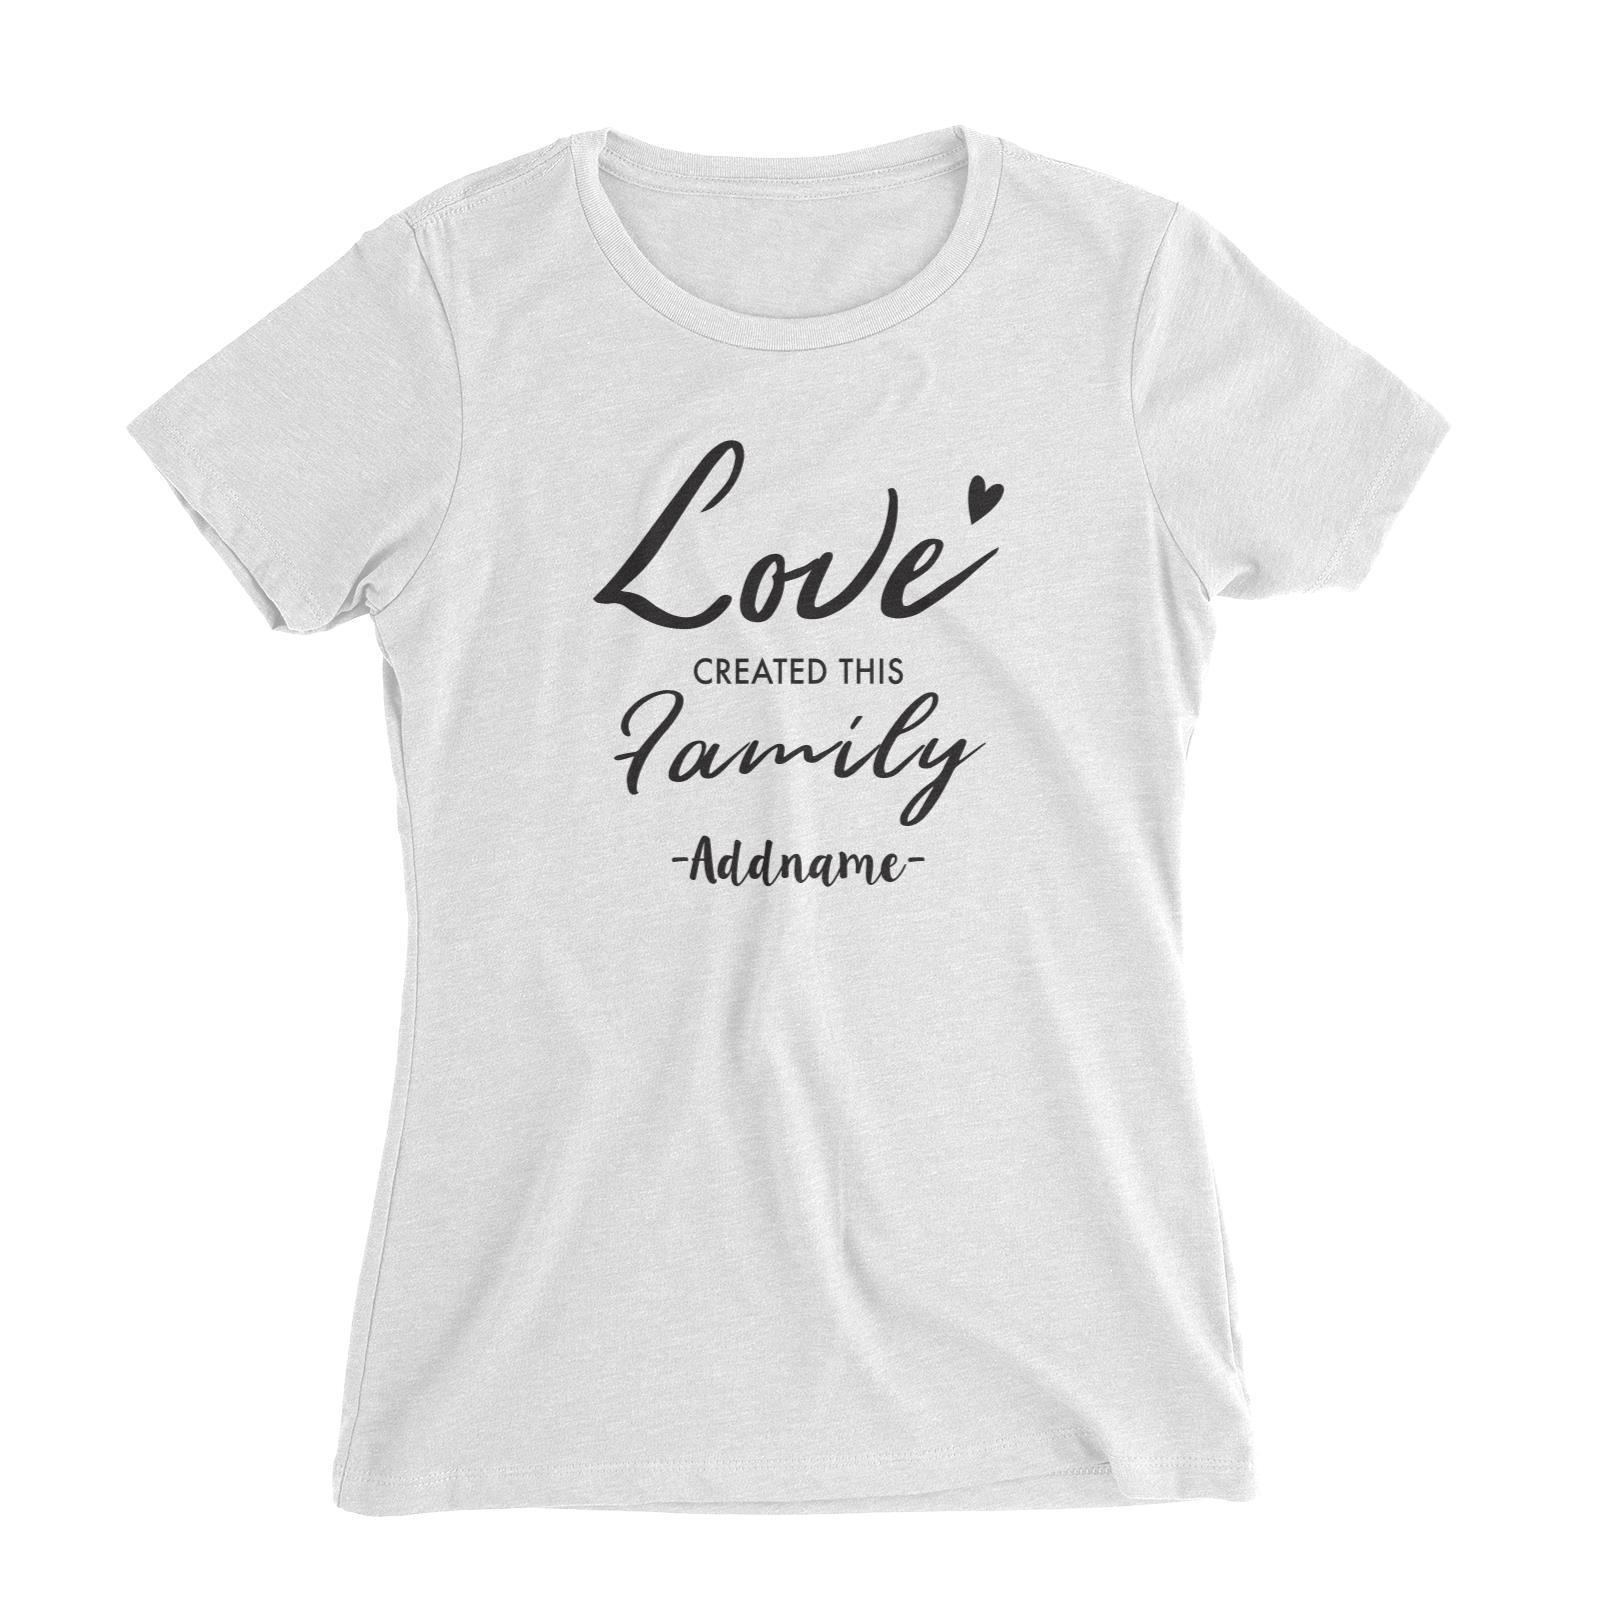 Love Created This Family Addname Women's Slim Fit T-Shirt  Matching Family Personalizable Designs